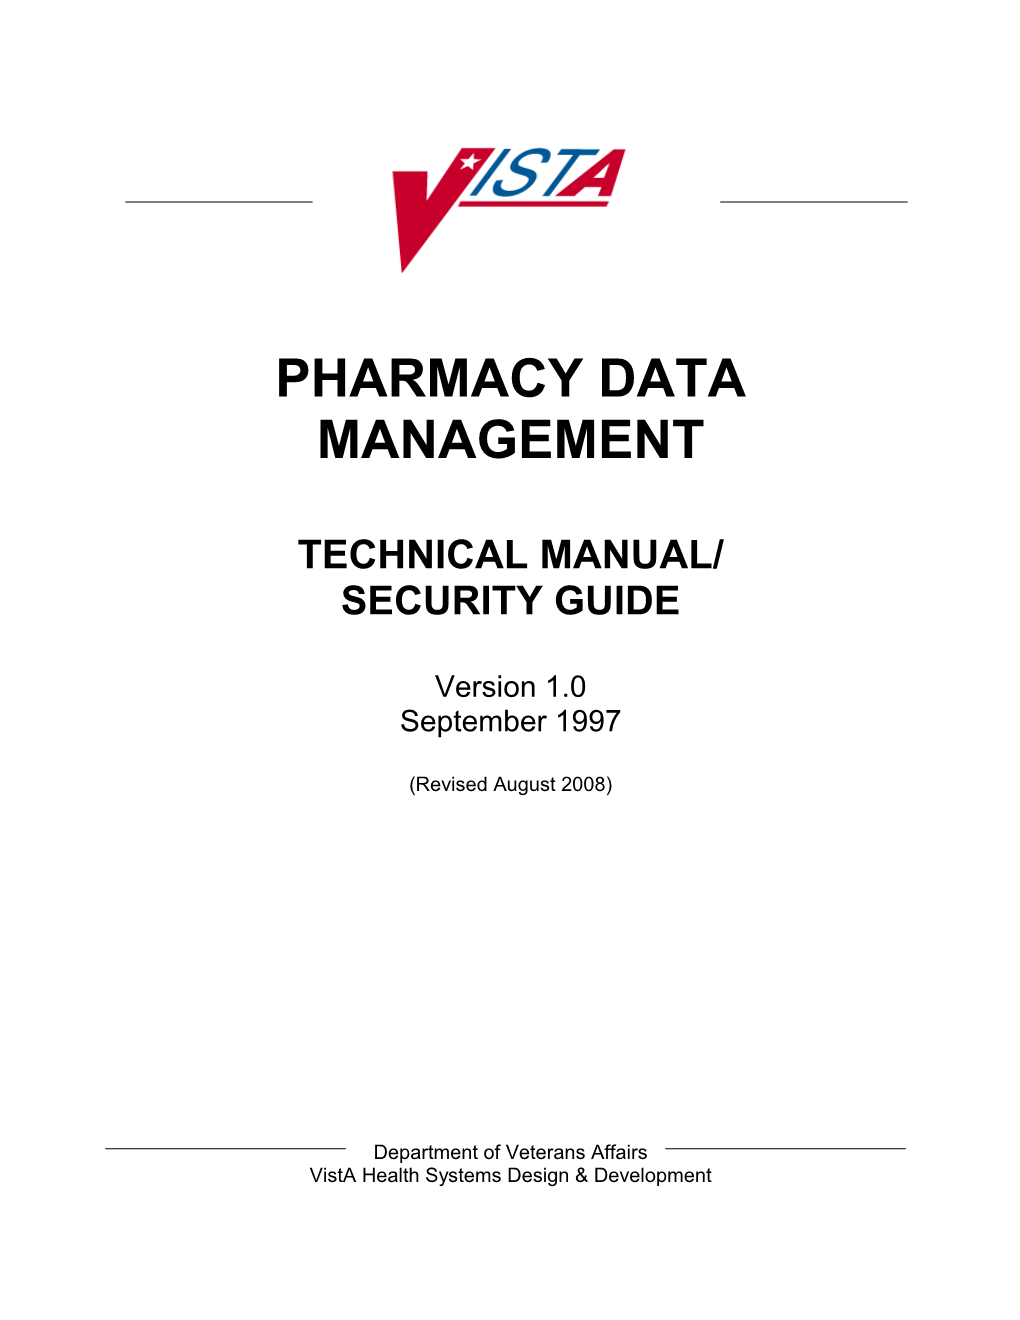 Department Of Veterans Affairs Vista Pharmacy Data Management Technical Manual / Security Guide